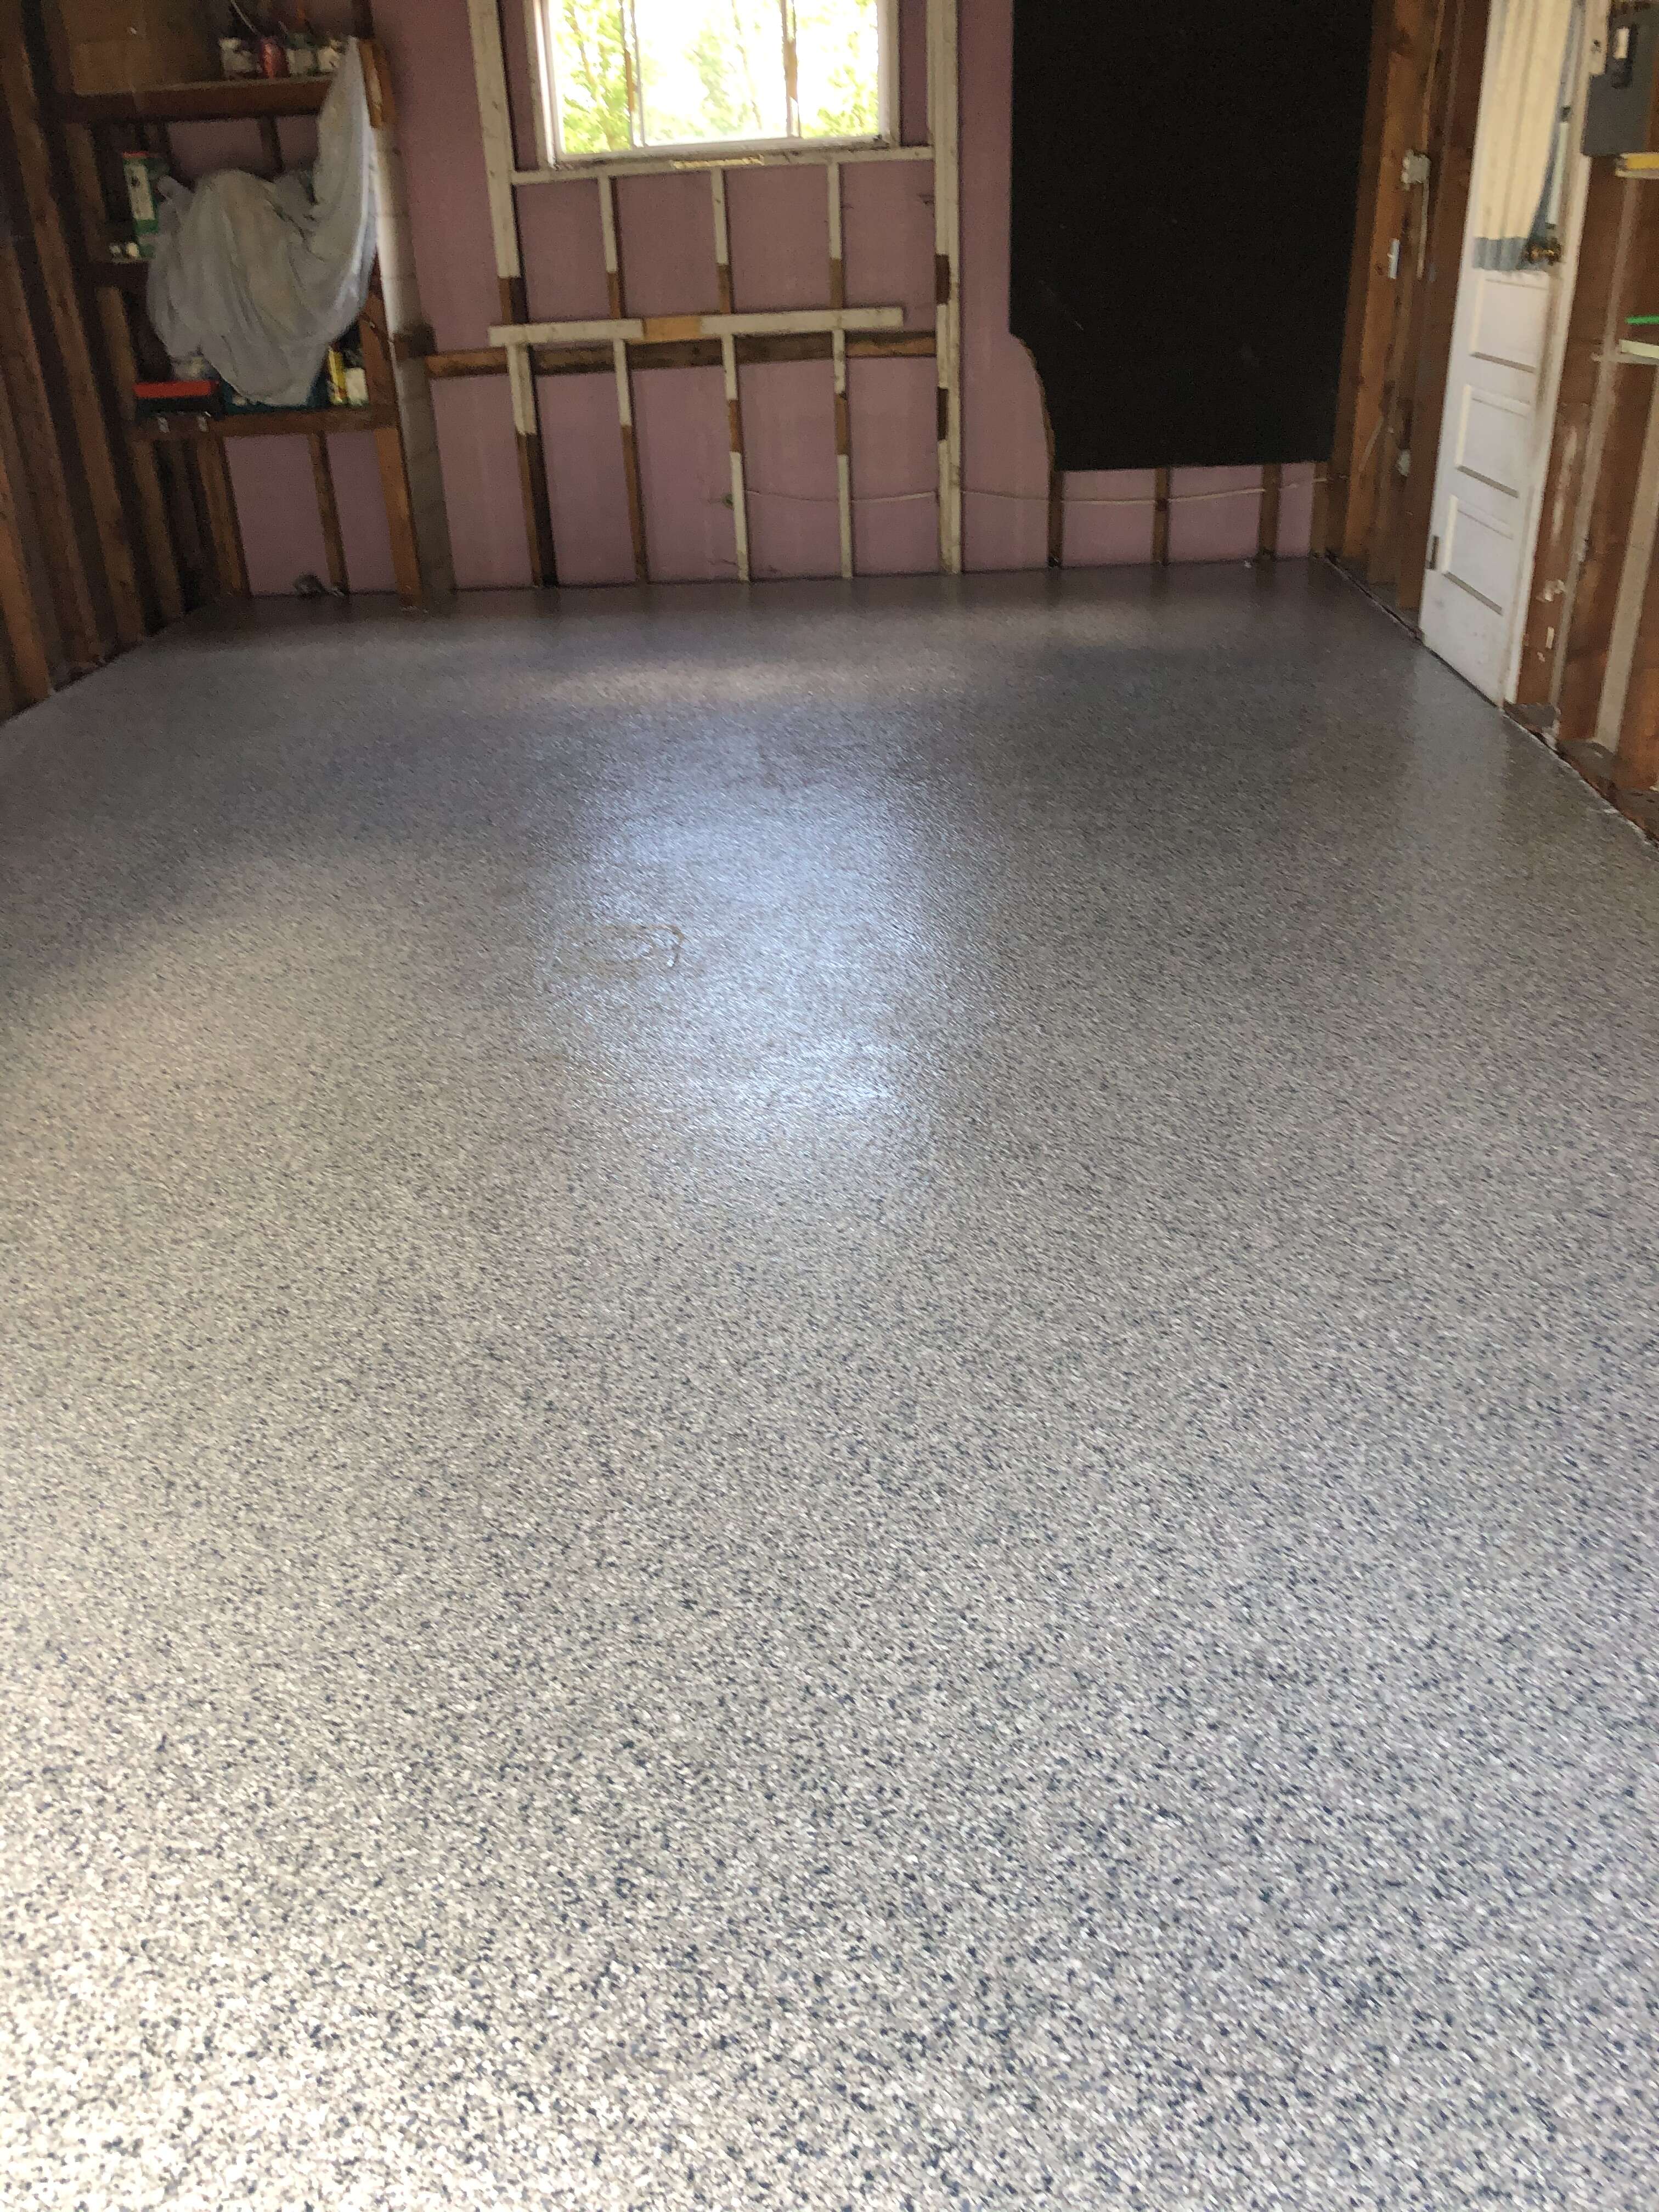 Residential Garage Floor Surface - Floors in a Day